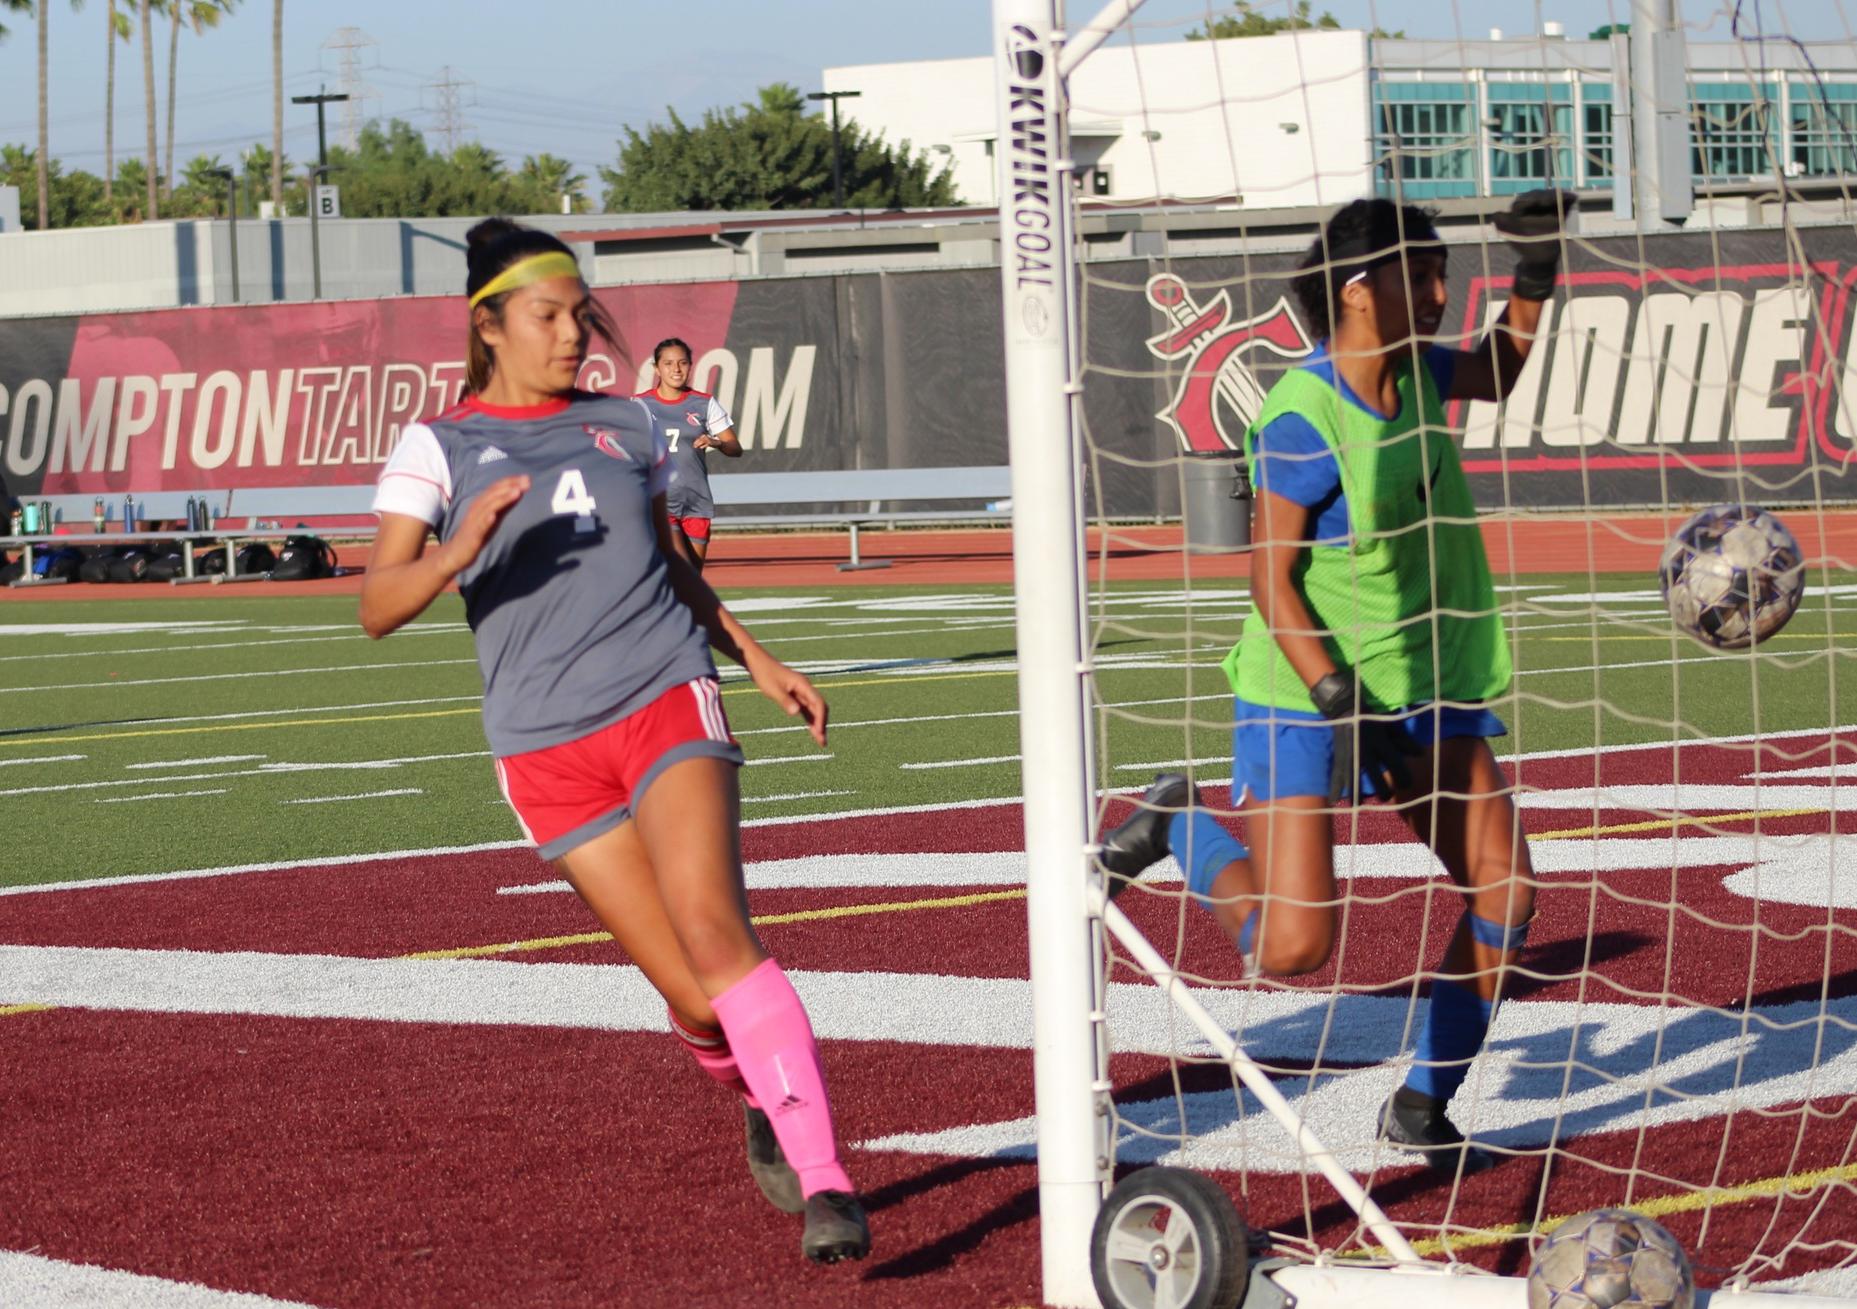 Rodriguez leads the Tartars to Victory with a Hat Trick